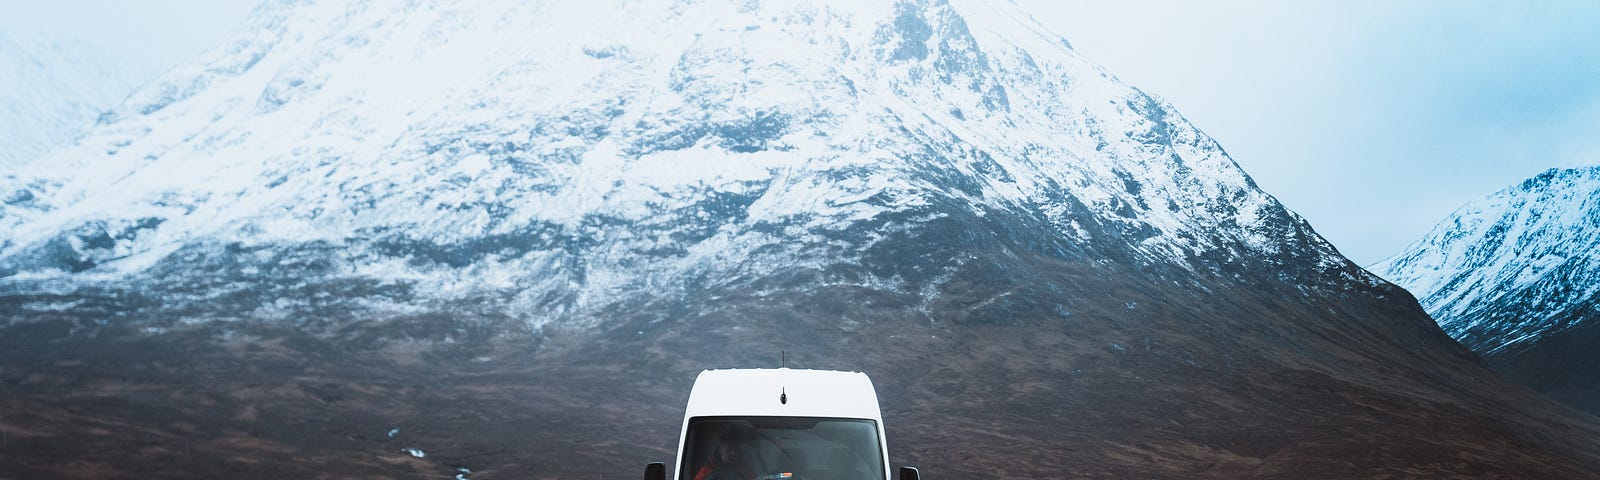 A high roof sprinter van driving down a road with snowy mountains behind it.